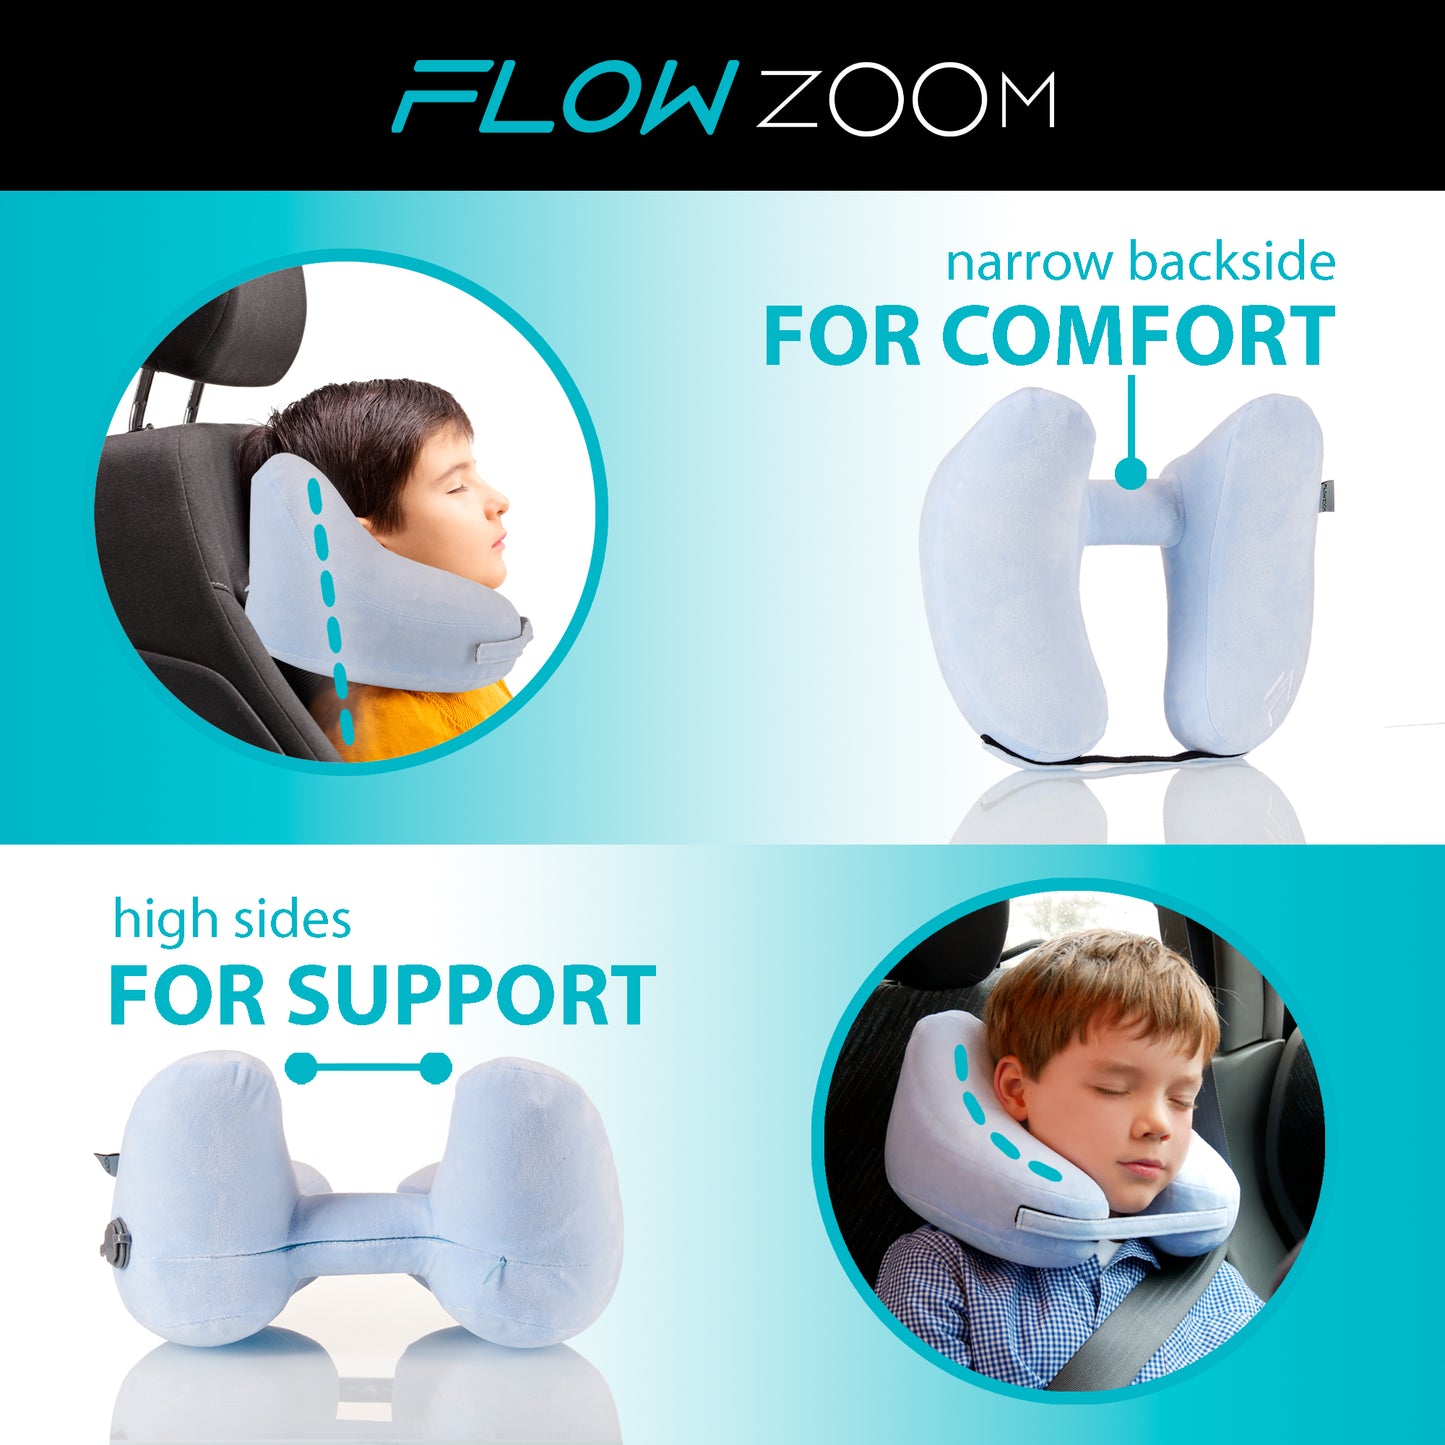 Inflatable Travel Pillow for Kids - Narrow Backside and High Sides